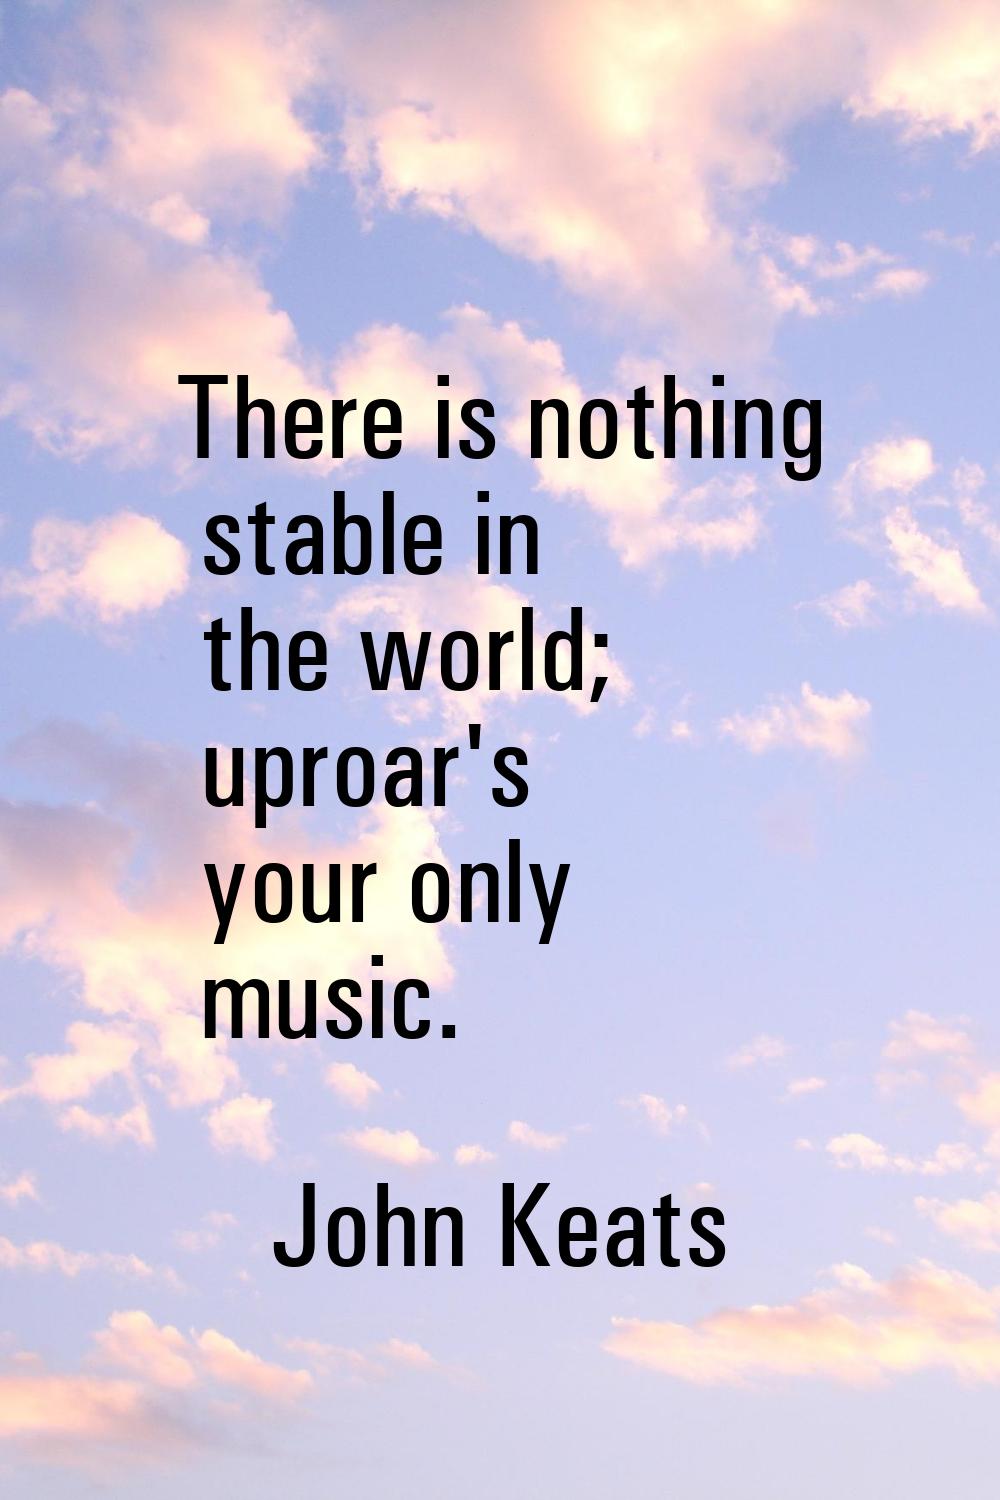 There is nothing stable in the world; uproar's your only music.